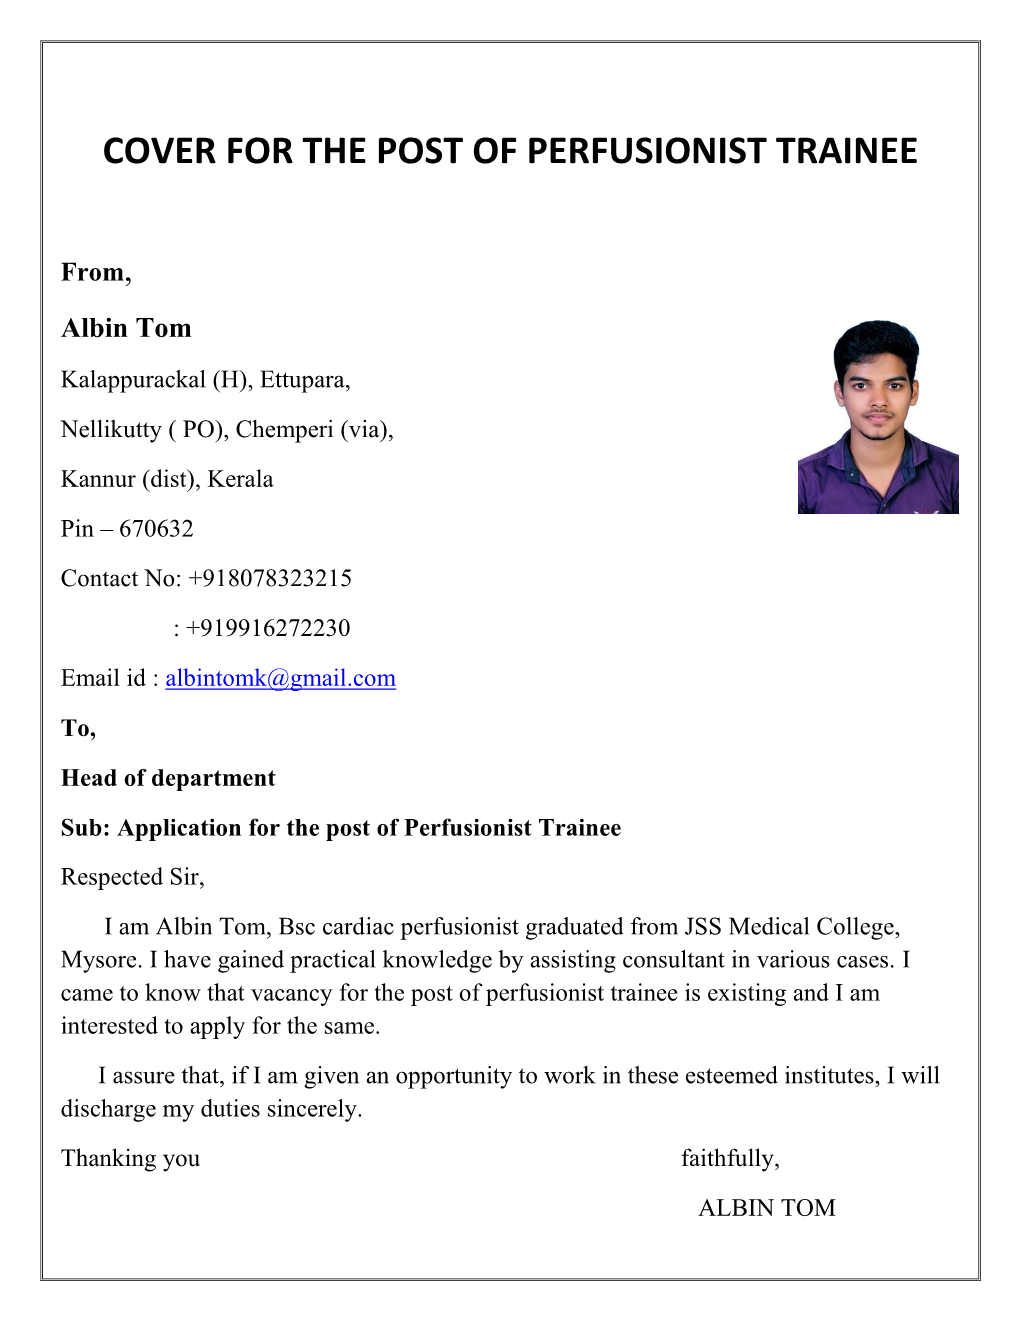 Cover for the Post of Perfusionist Trainee